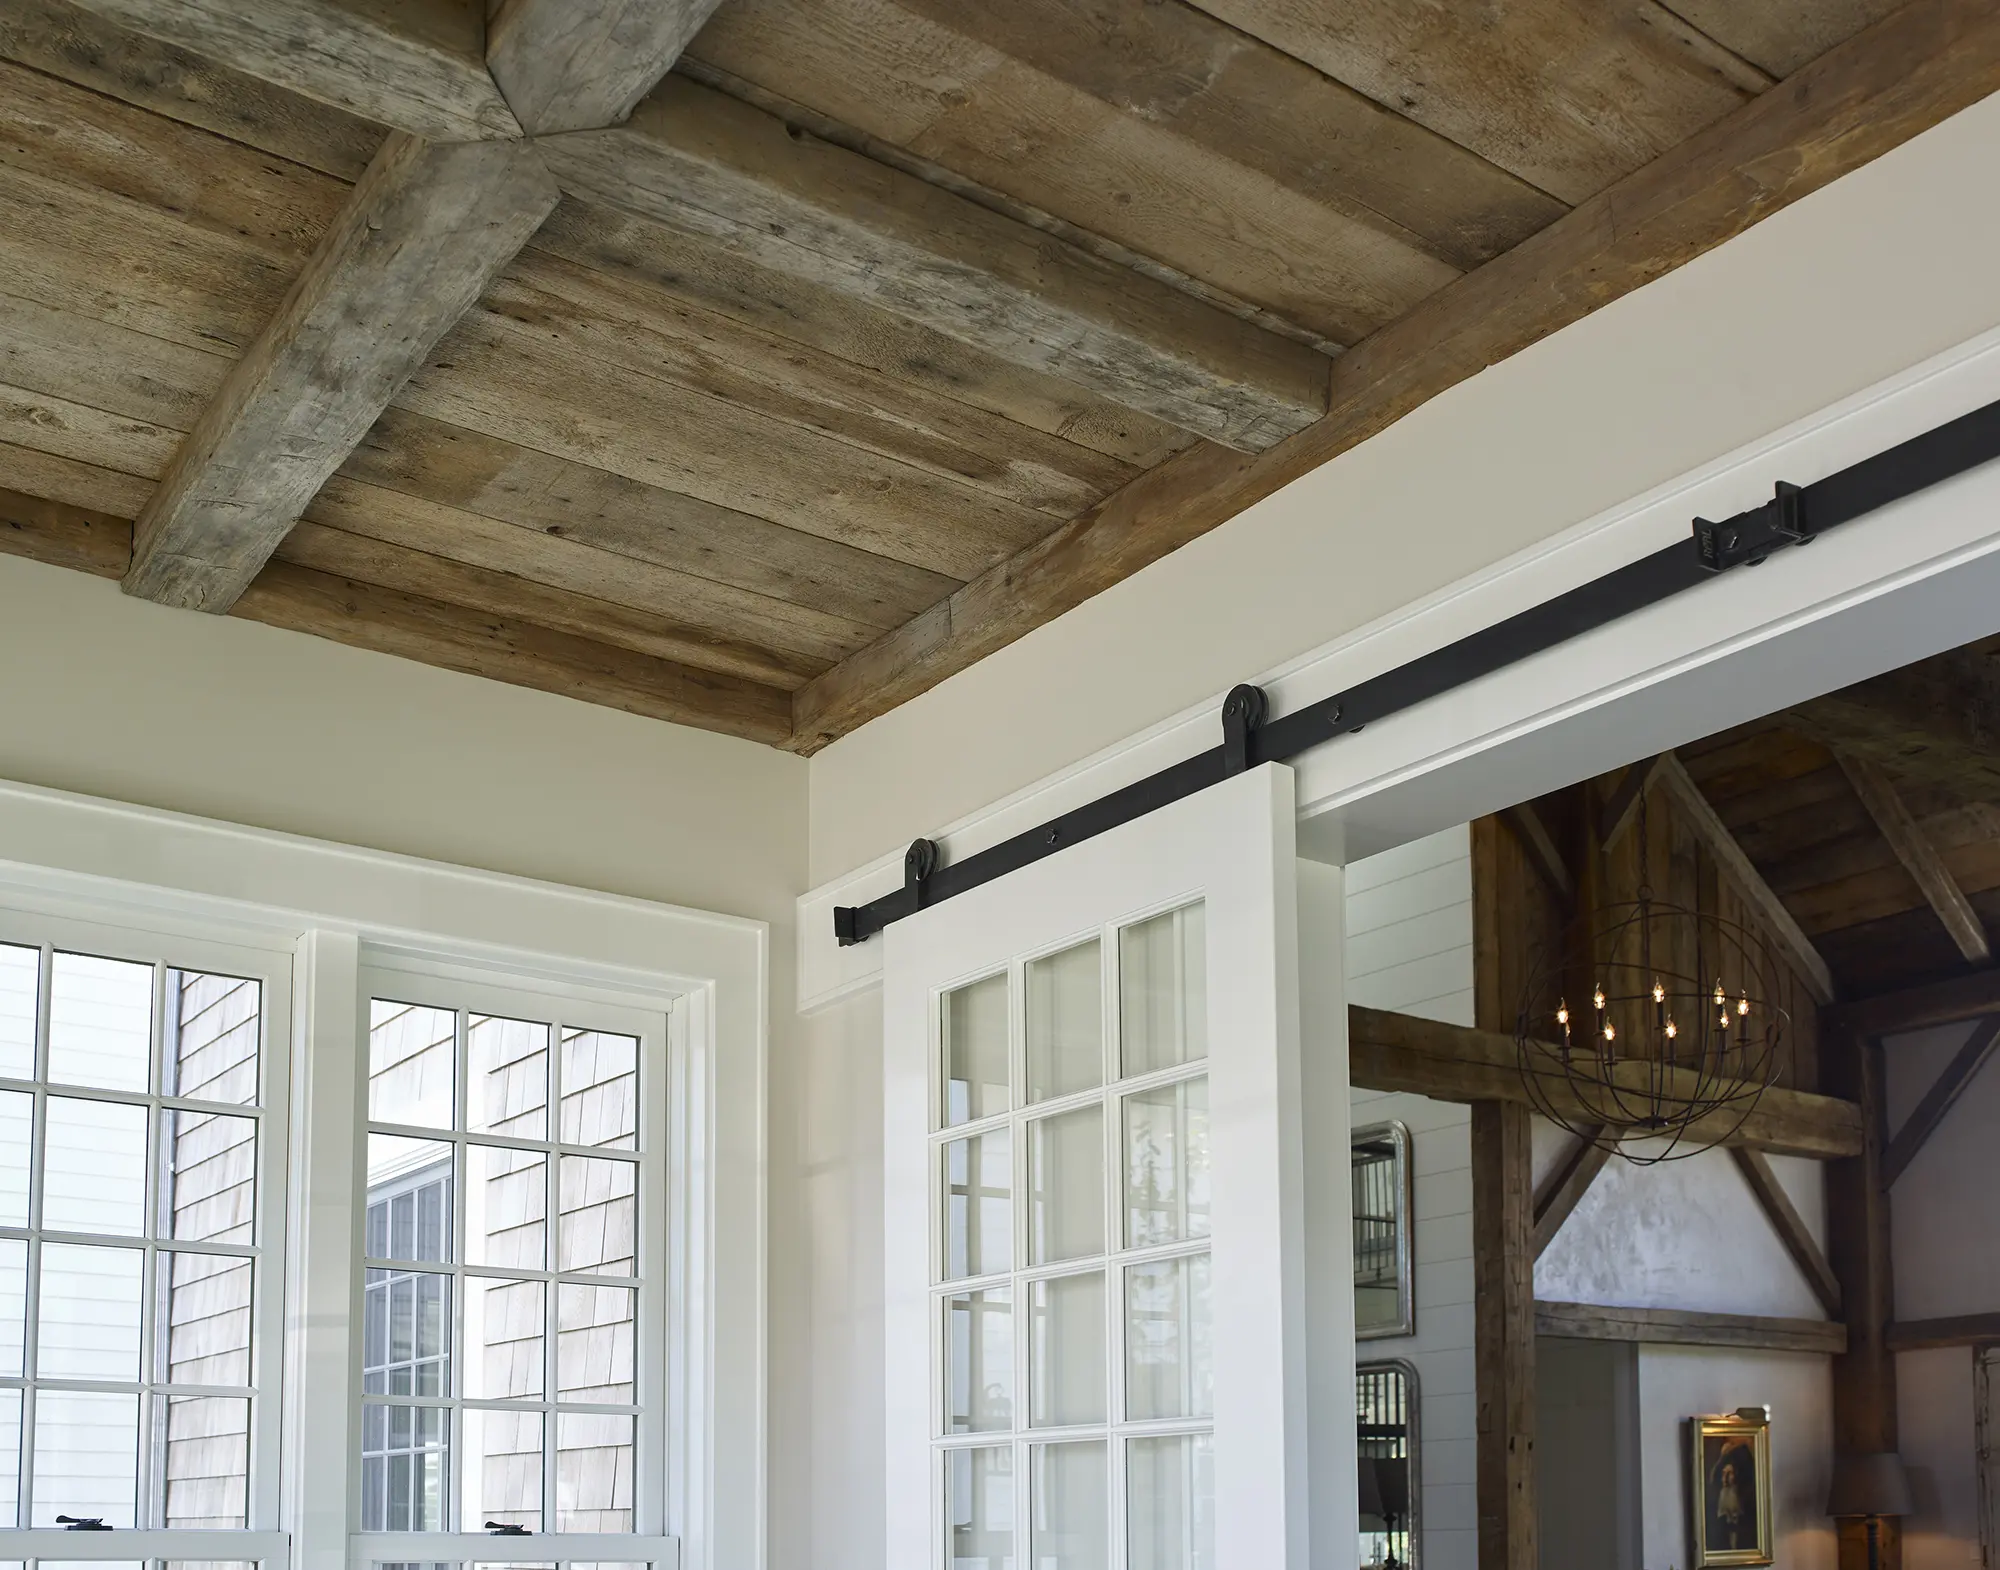 View of exposed beams on ceiling and sliding door to living area